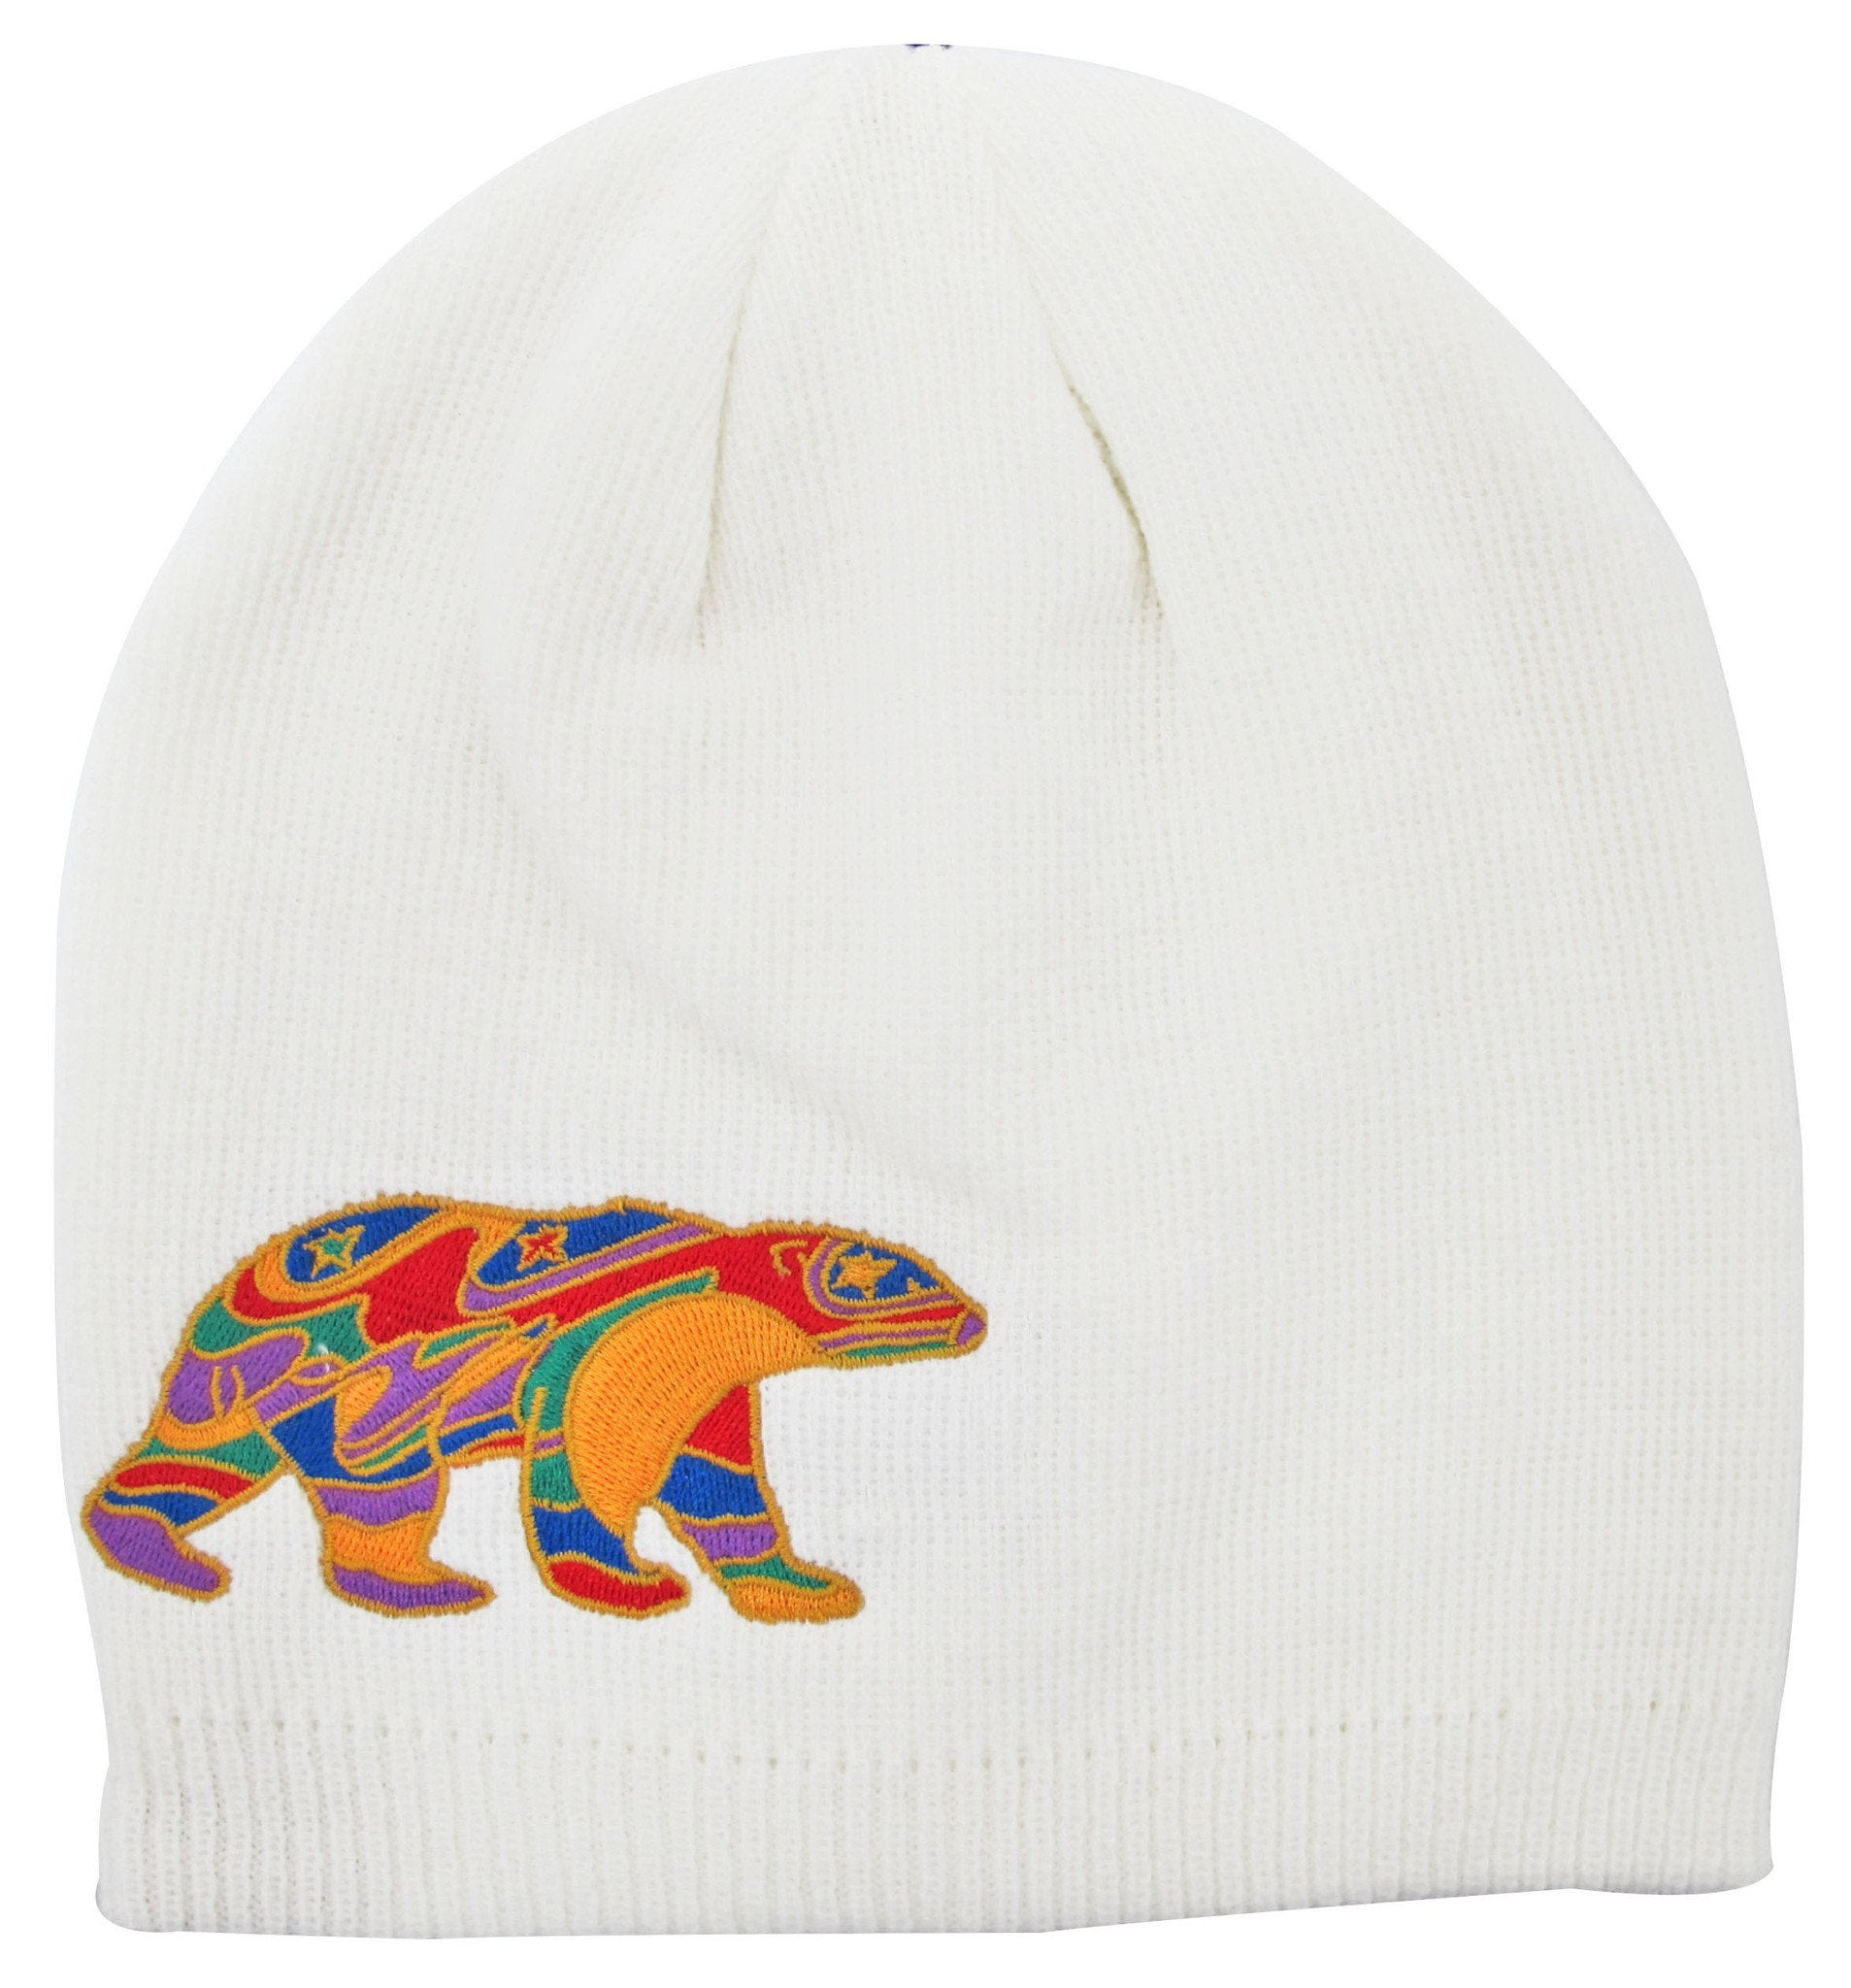 Embroidered Knitted Hat Dawn Oman Alpha Bear White - Embroidered Knitted Hat Dawn Oman Alpha Bear White -  - House of Himwitsa Native Art Gallery and Gifts